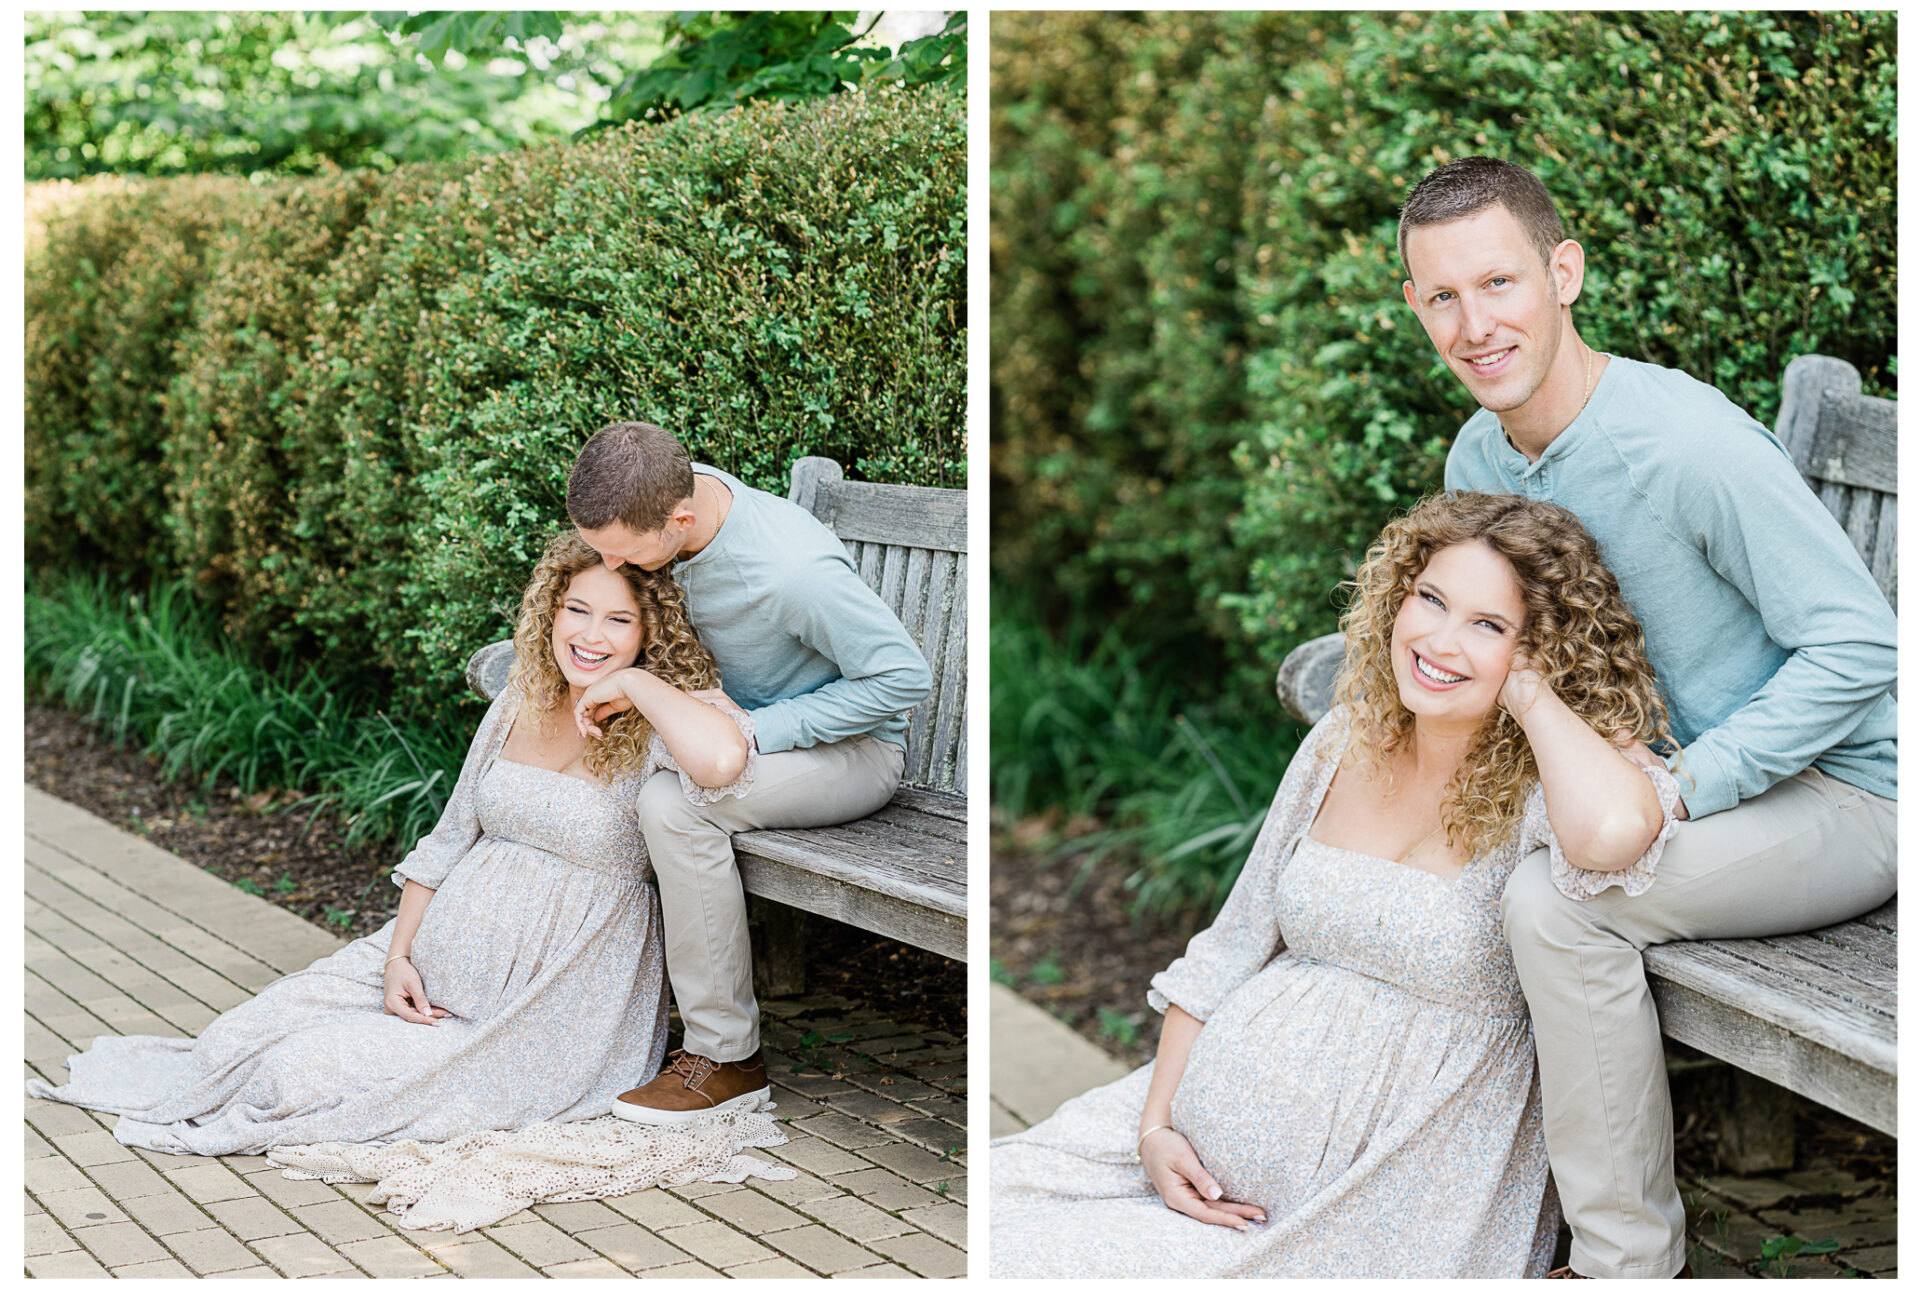 Winter Freire Photography | maternity session outdoors | husband and wife sitting on a park bench